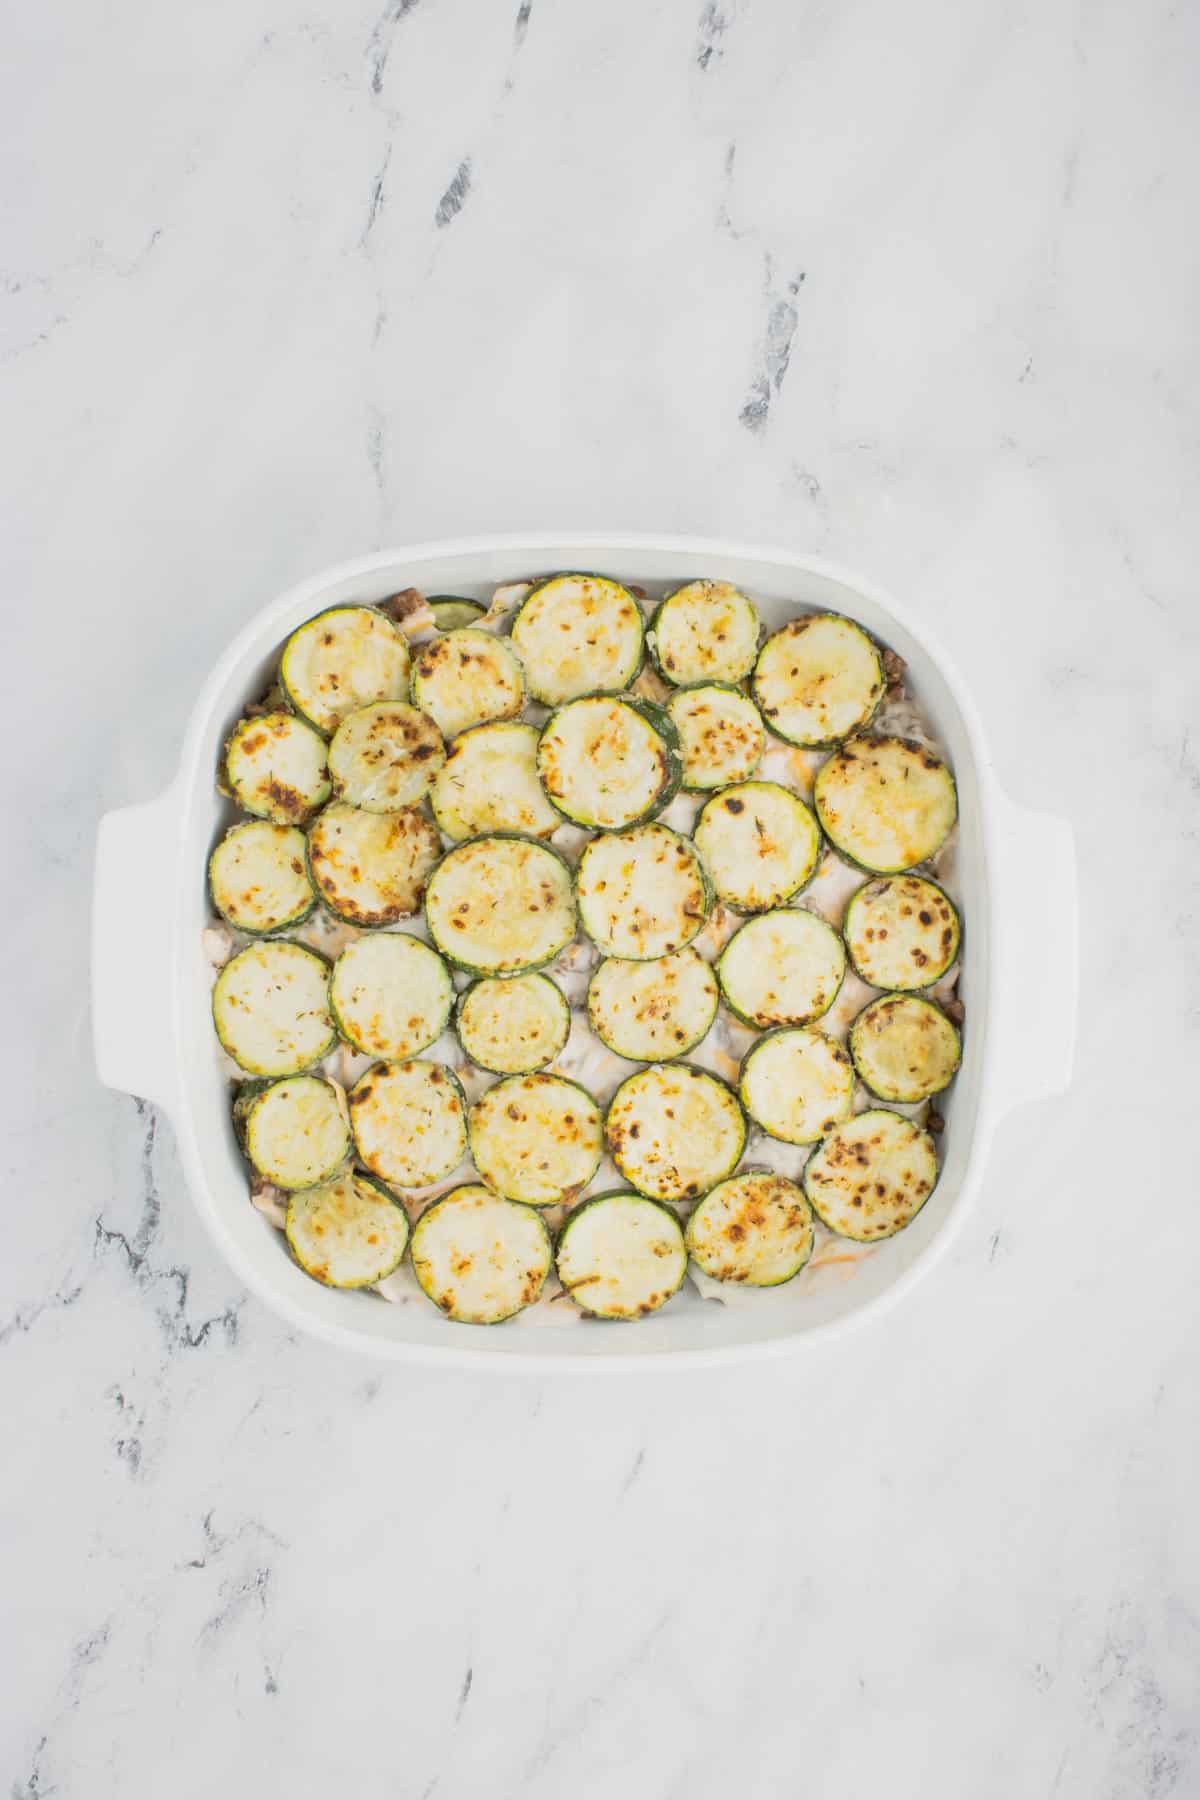 sauteed zucchini slices on top of creamy soup mixture in a baking dish